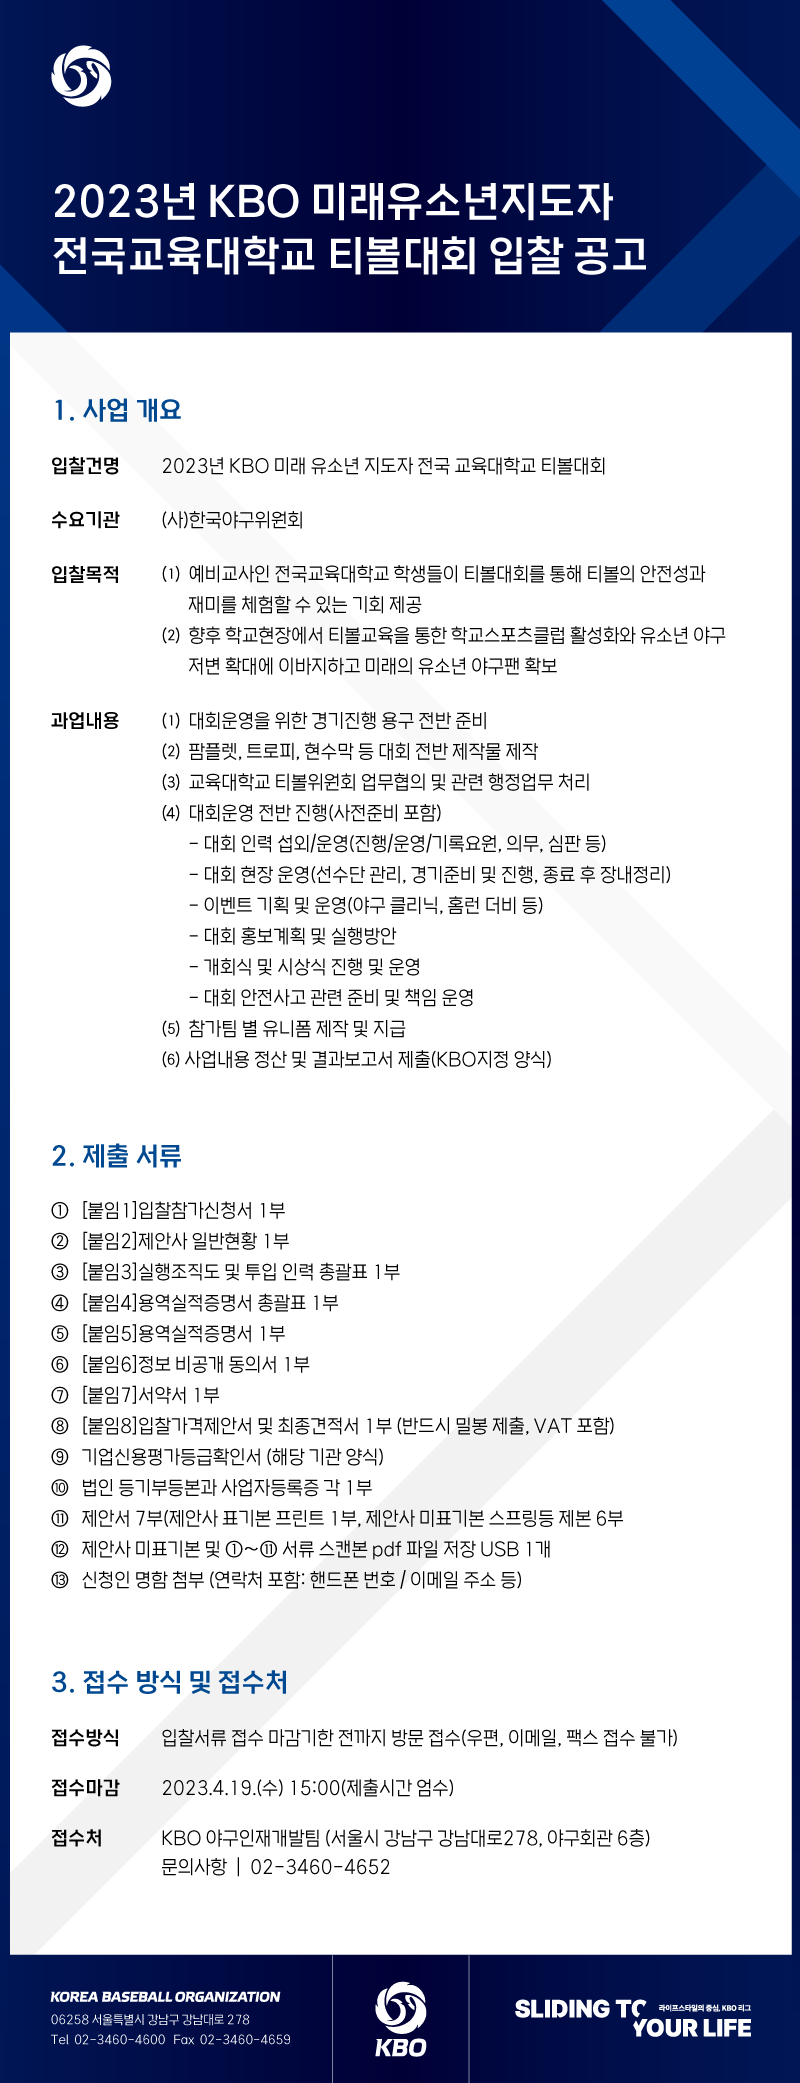 notice/images/2023/4/티볼대회-입찰-공고.png